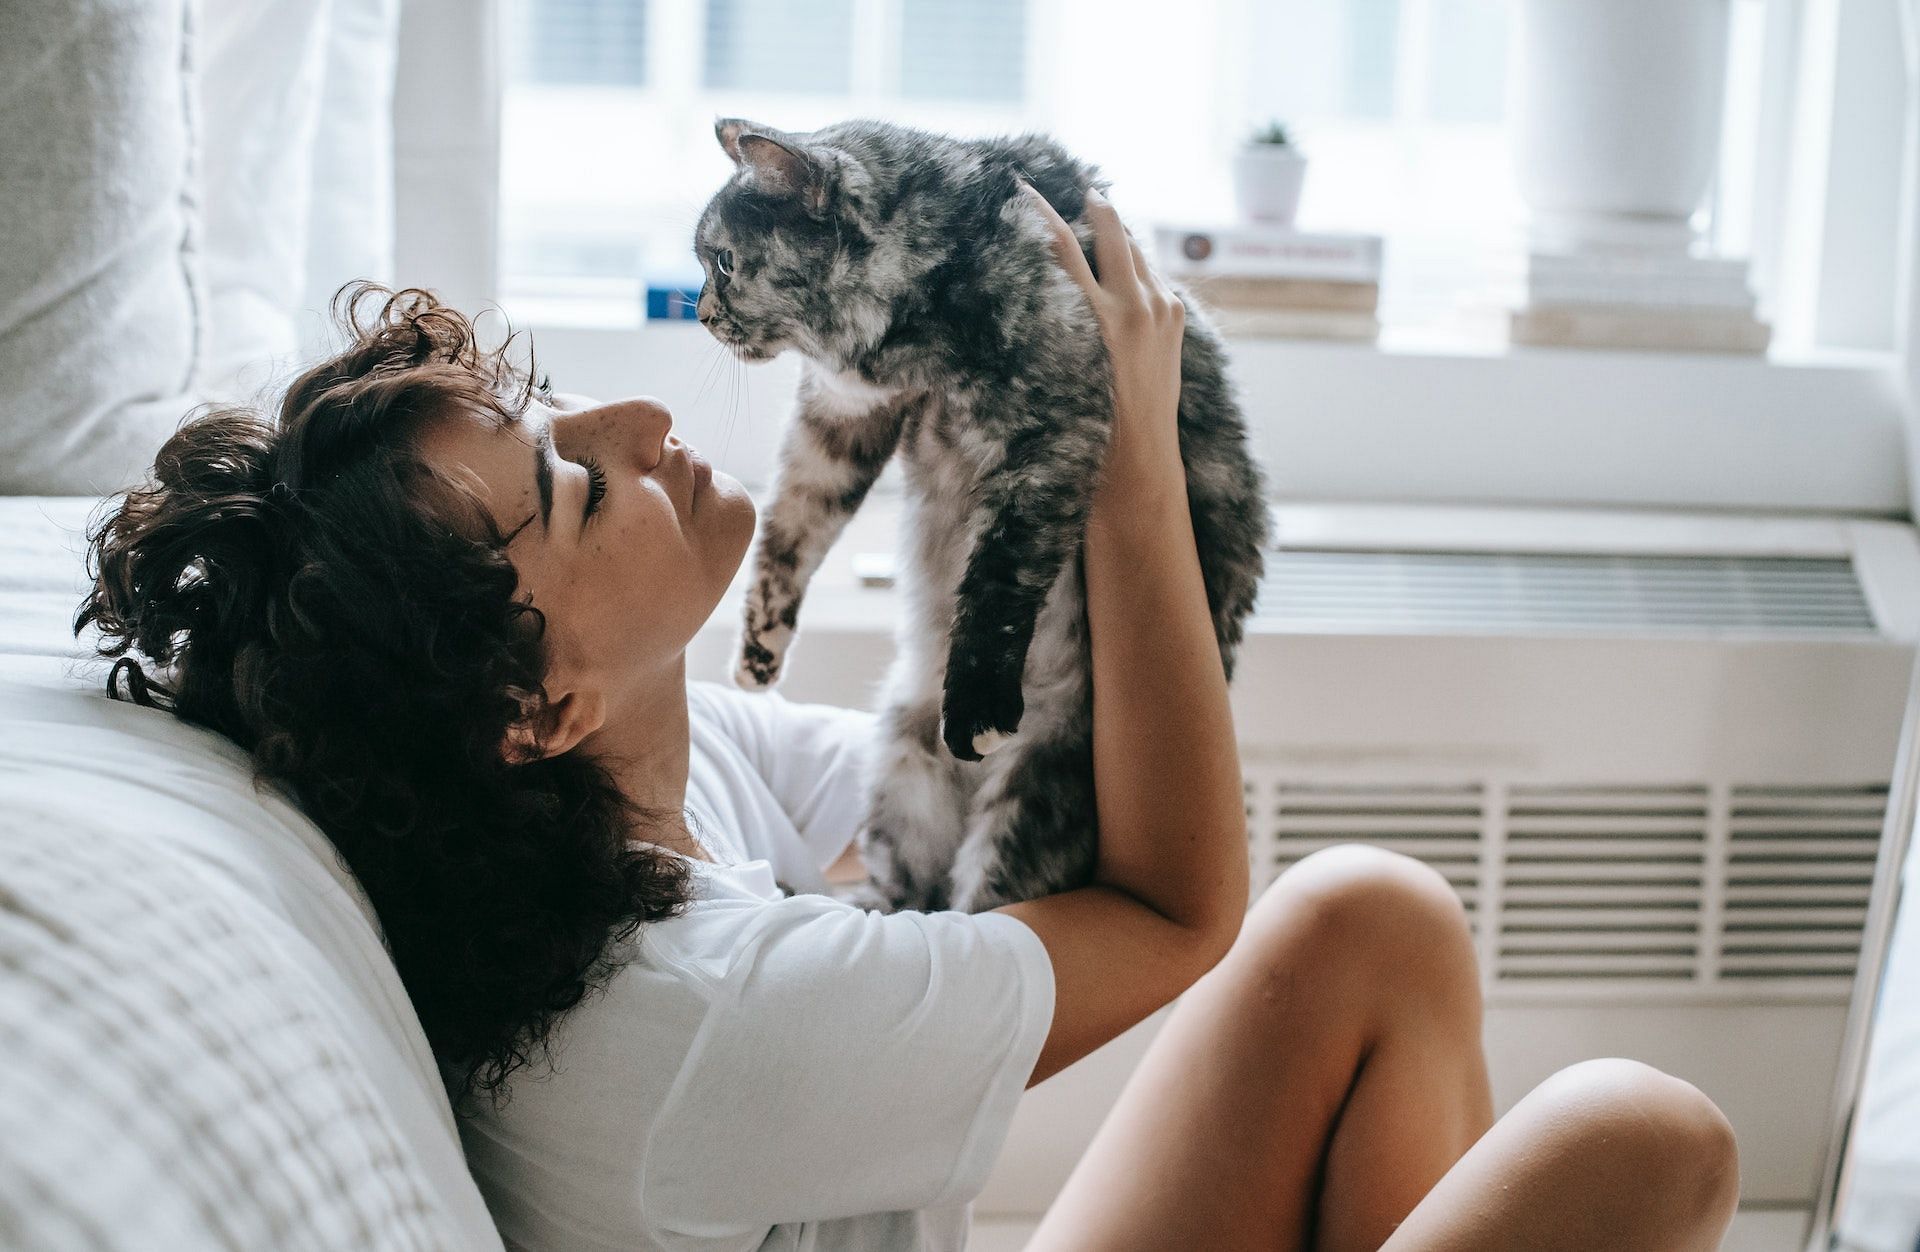 Do not let your cat lick you around your mouth, nose, or eyes. (Photo via Pexels/Sam Lion)